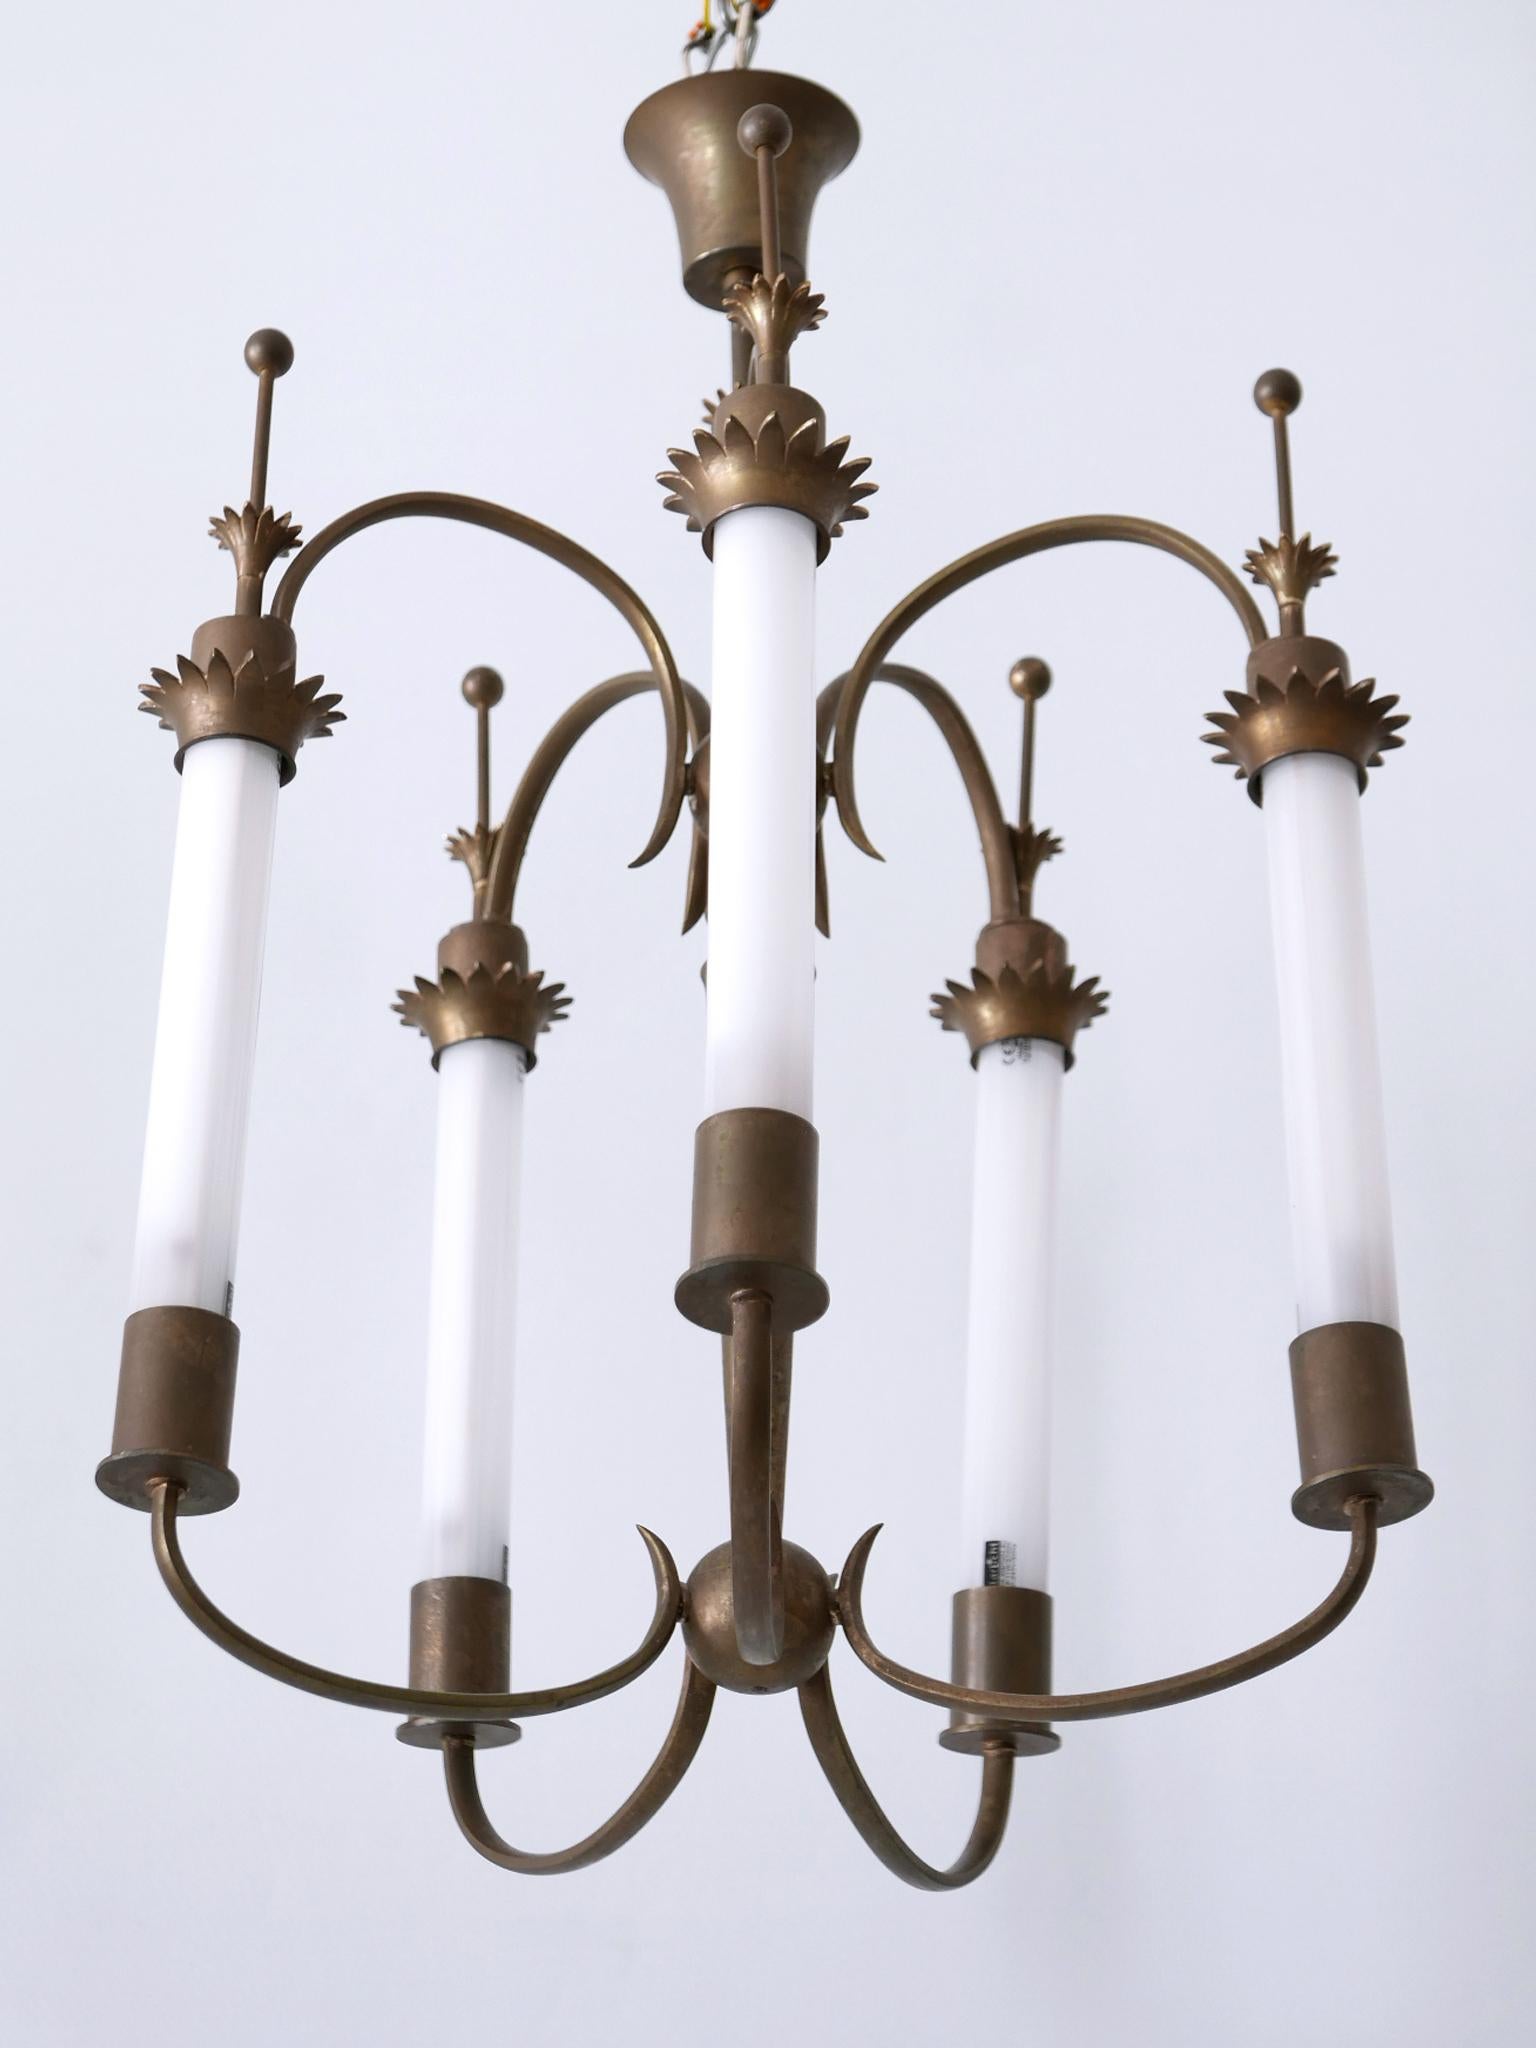 Exceptional Five-Flamed Art Deco Chandelier or Ceiling Lamp Germany 1930s For Sale 4